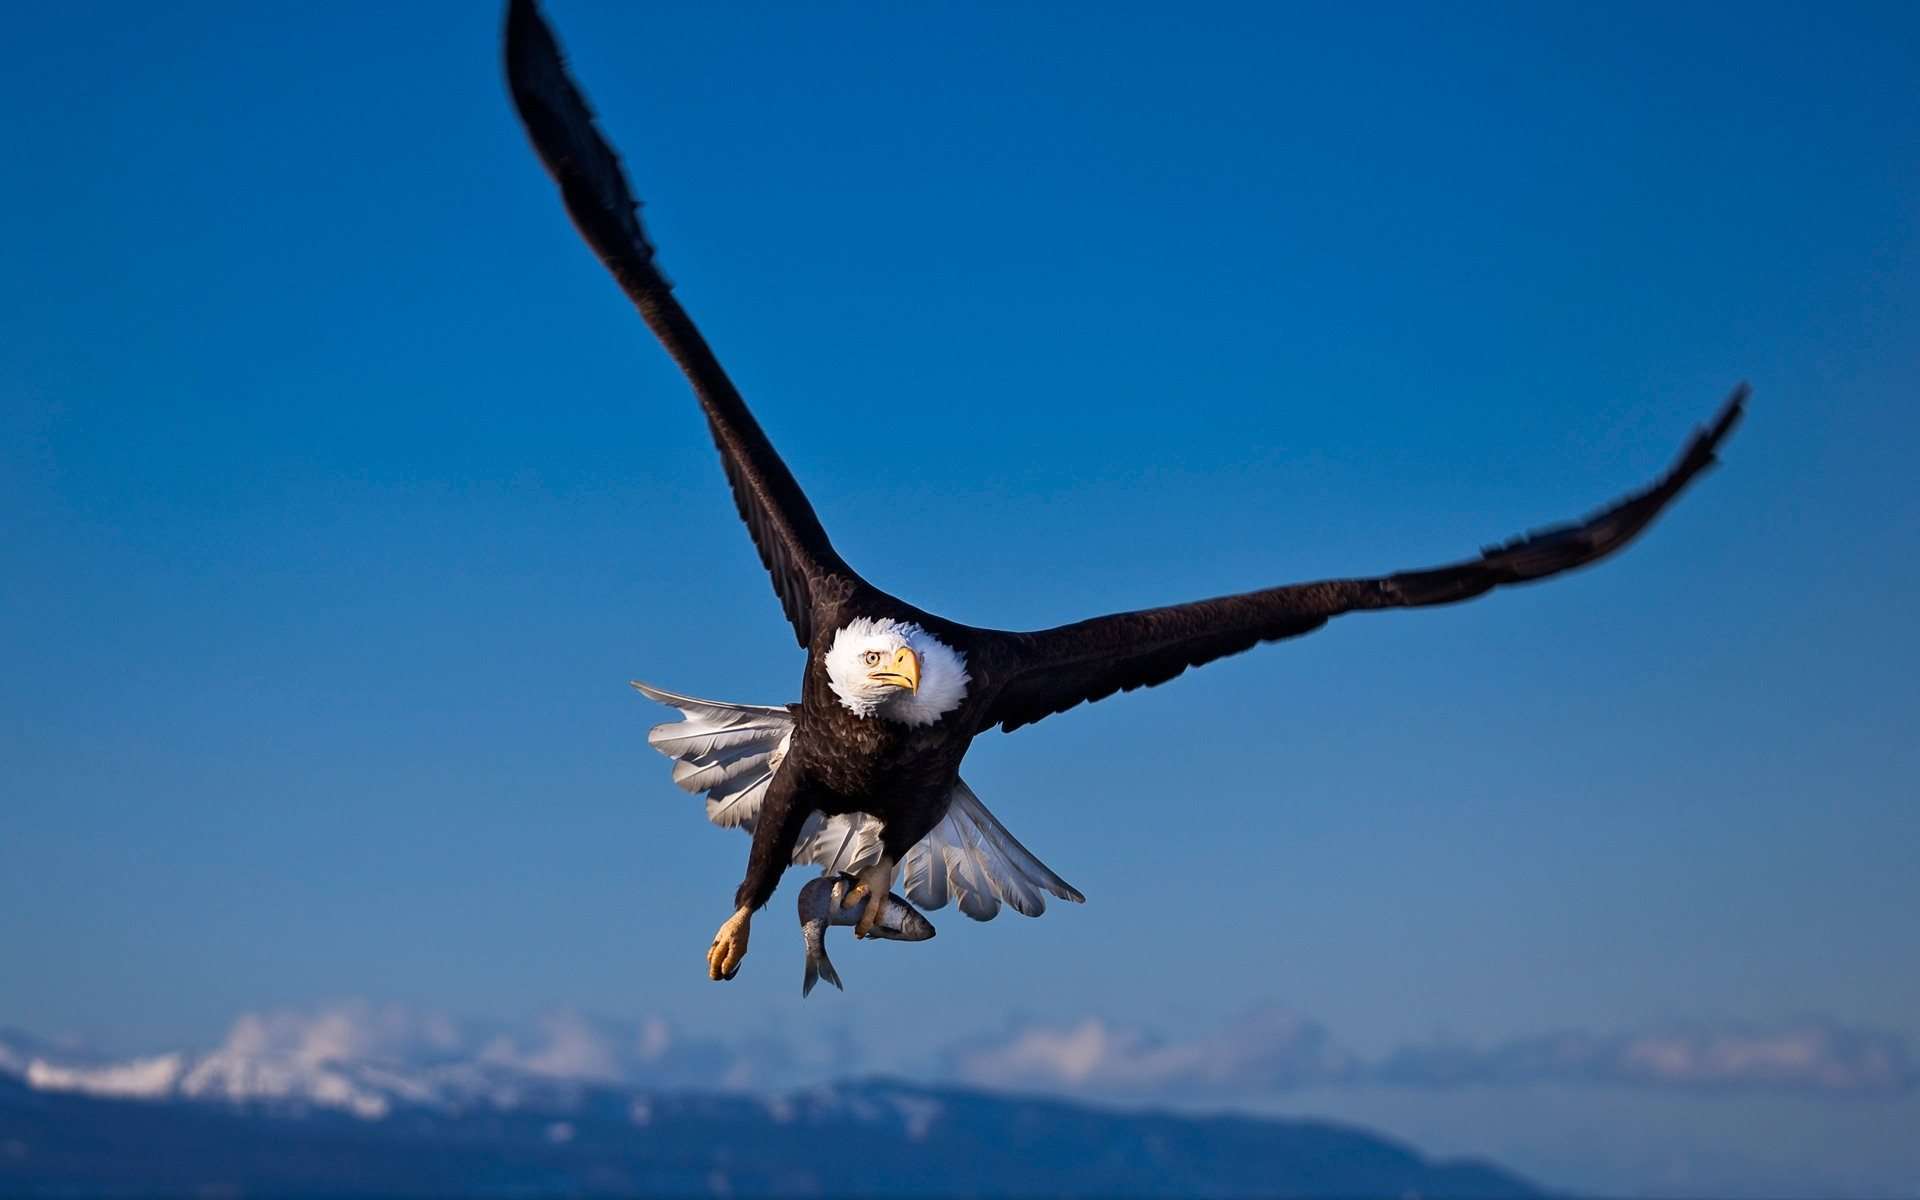 High Definition eagle wallpaper for free download